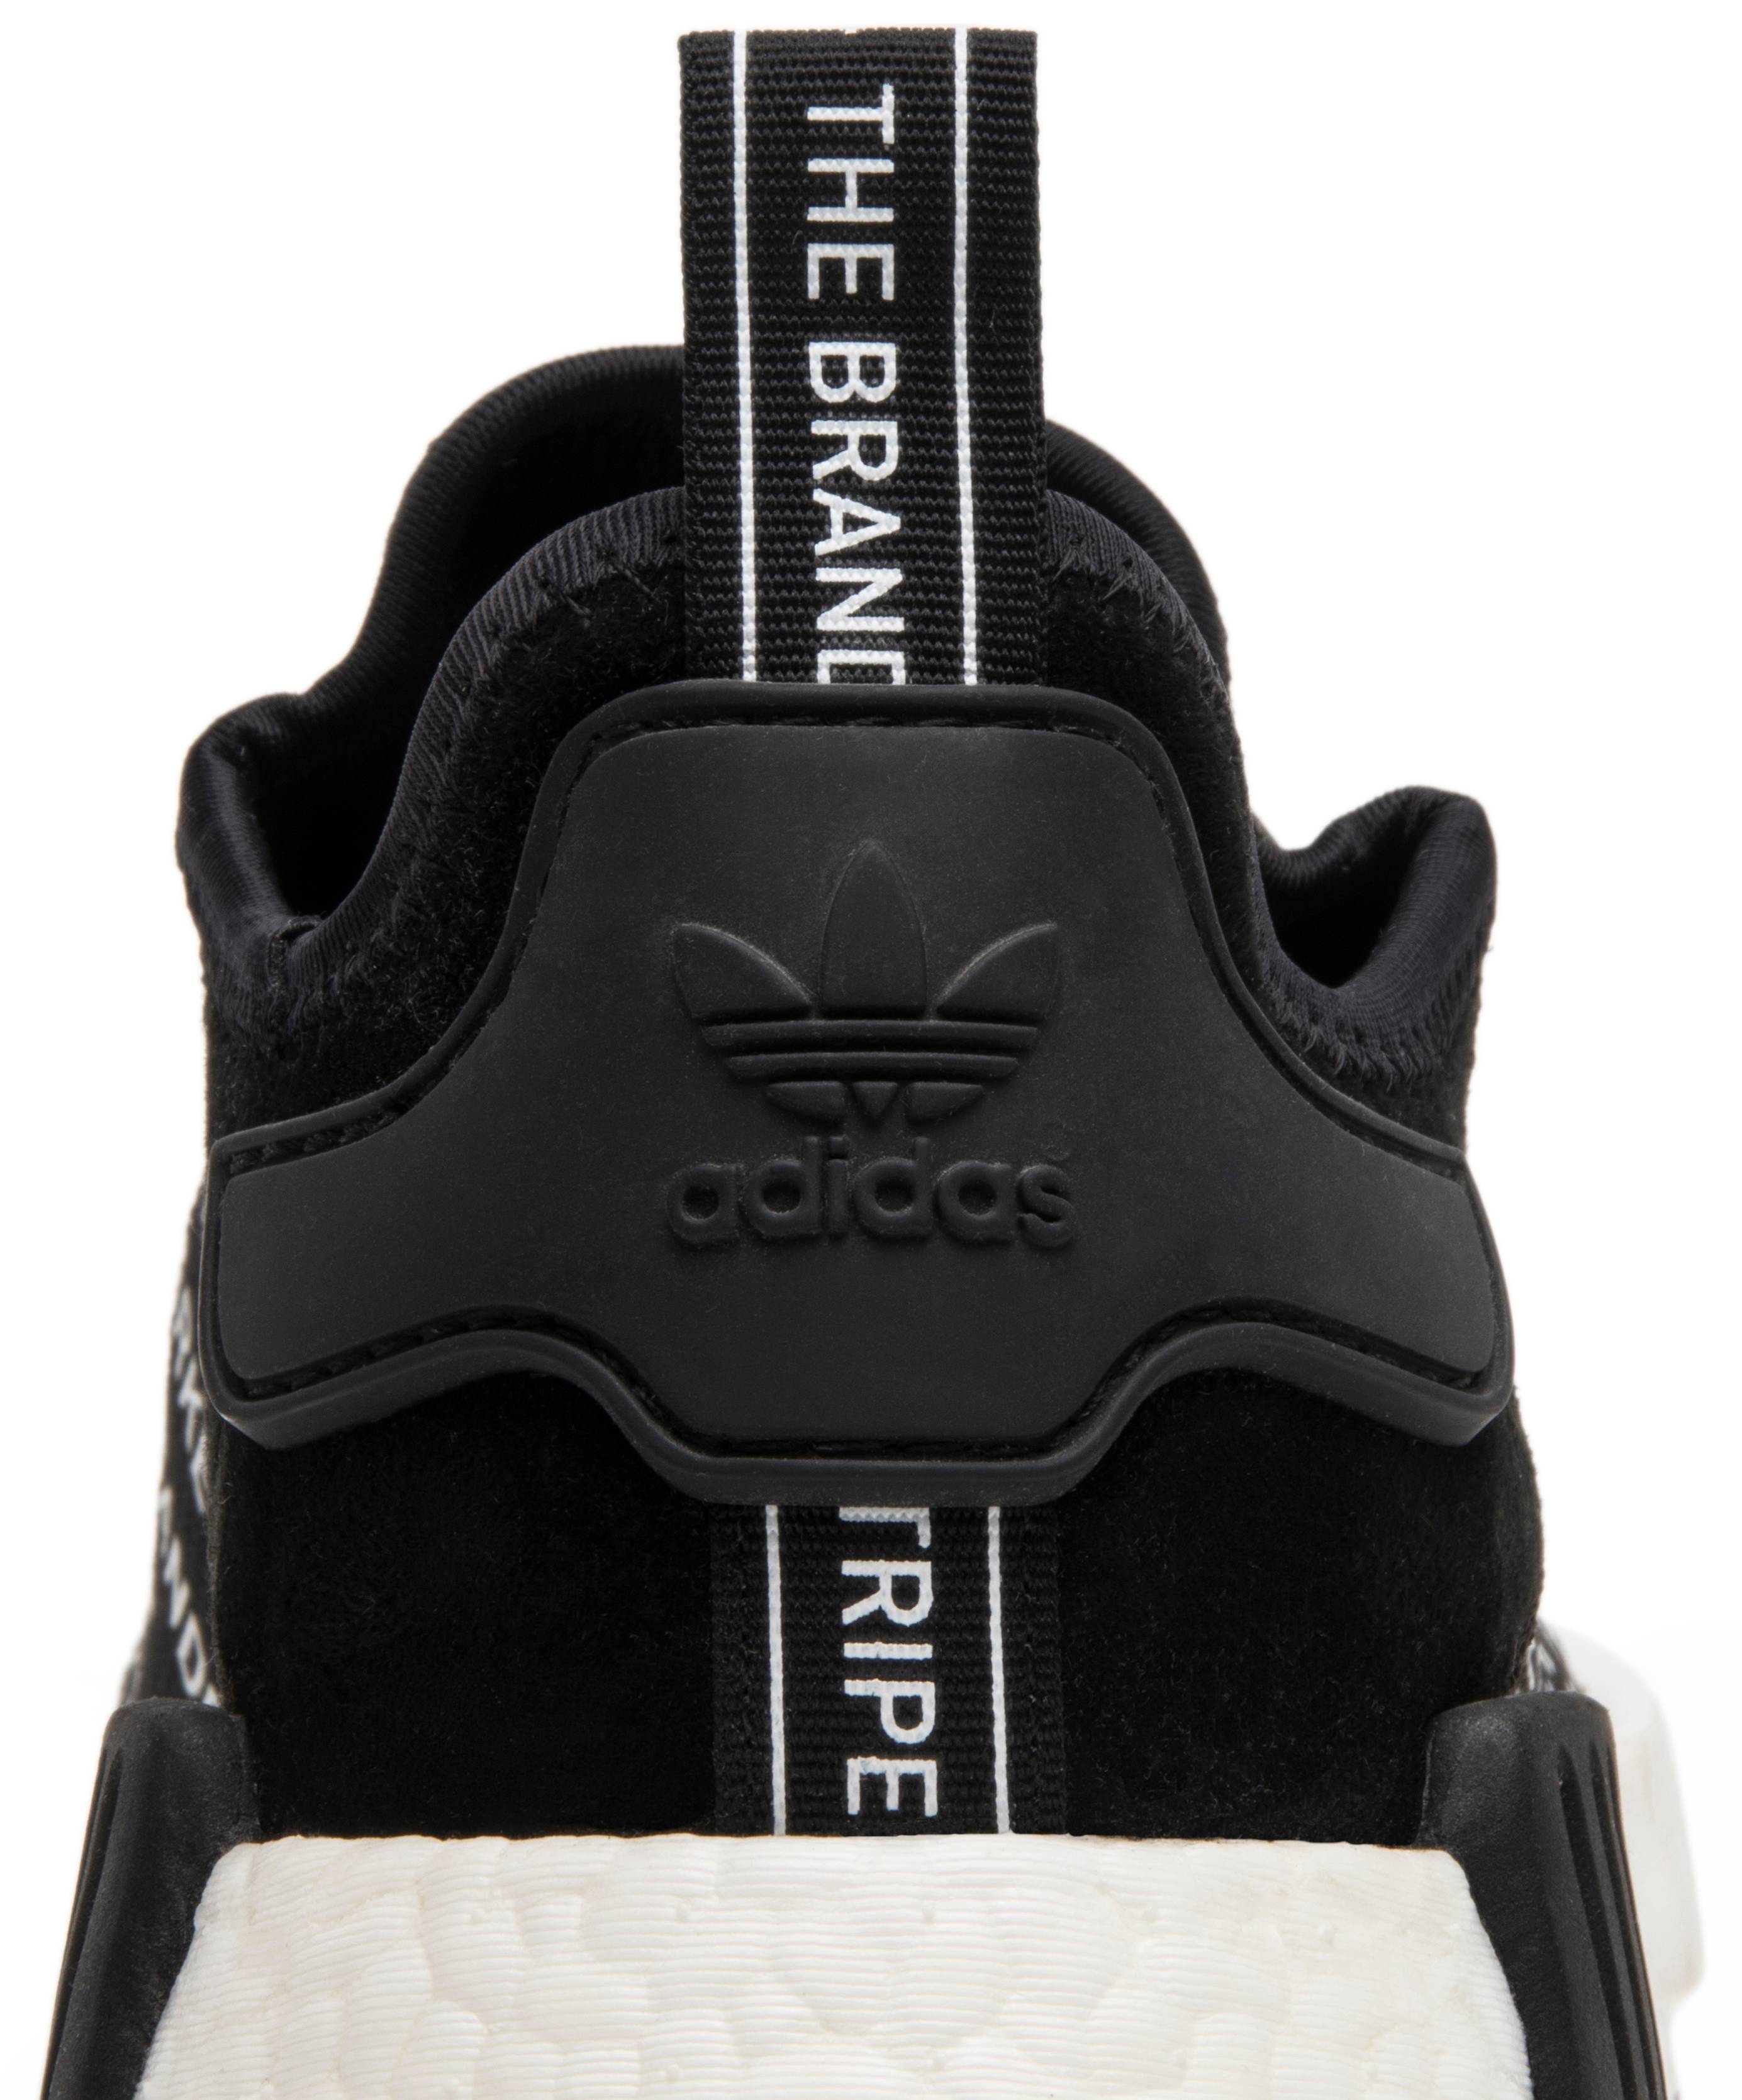 NMD_R1 'The Brand W/ The 3 Stripes' - adidas - S76519 | GOAT